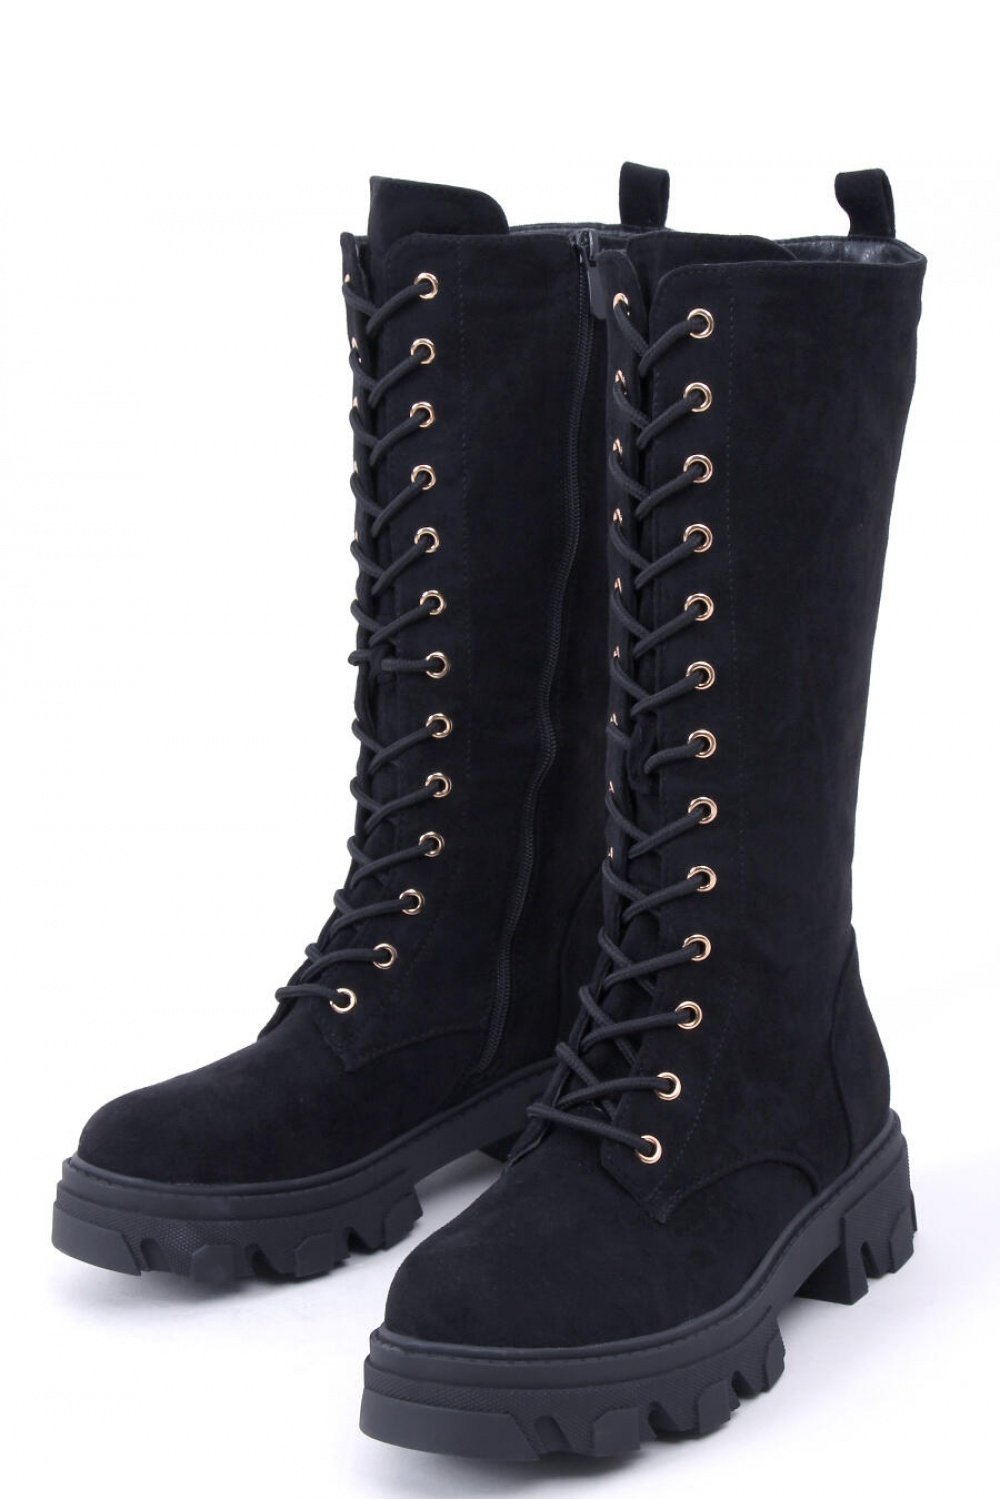 Officer boots model 174107 Inello Posh Styles Apparel